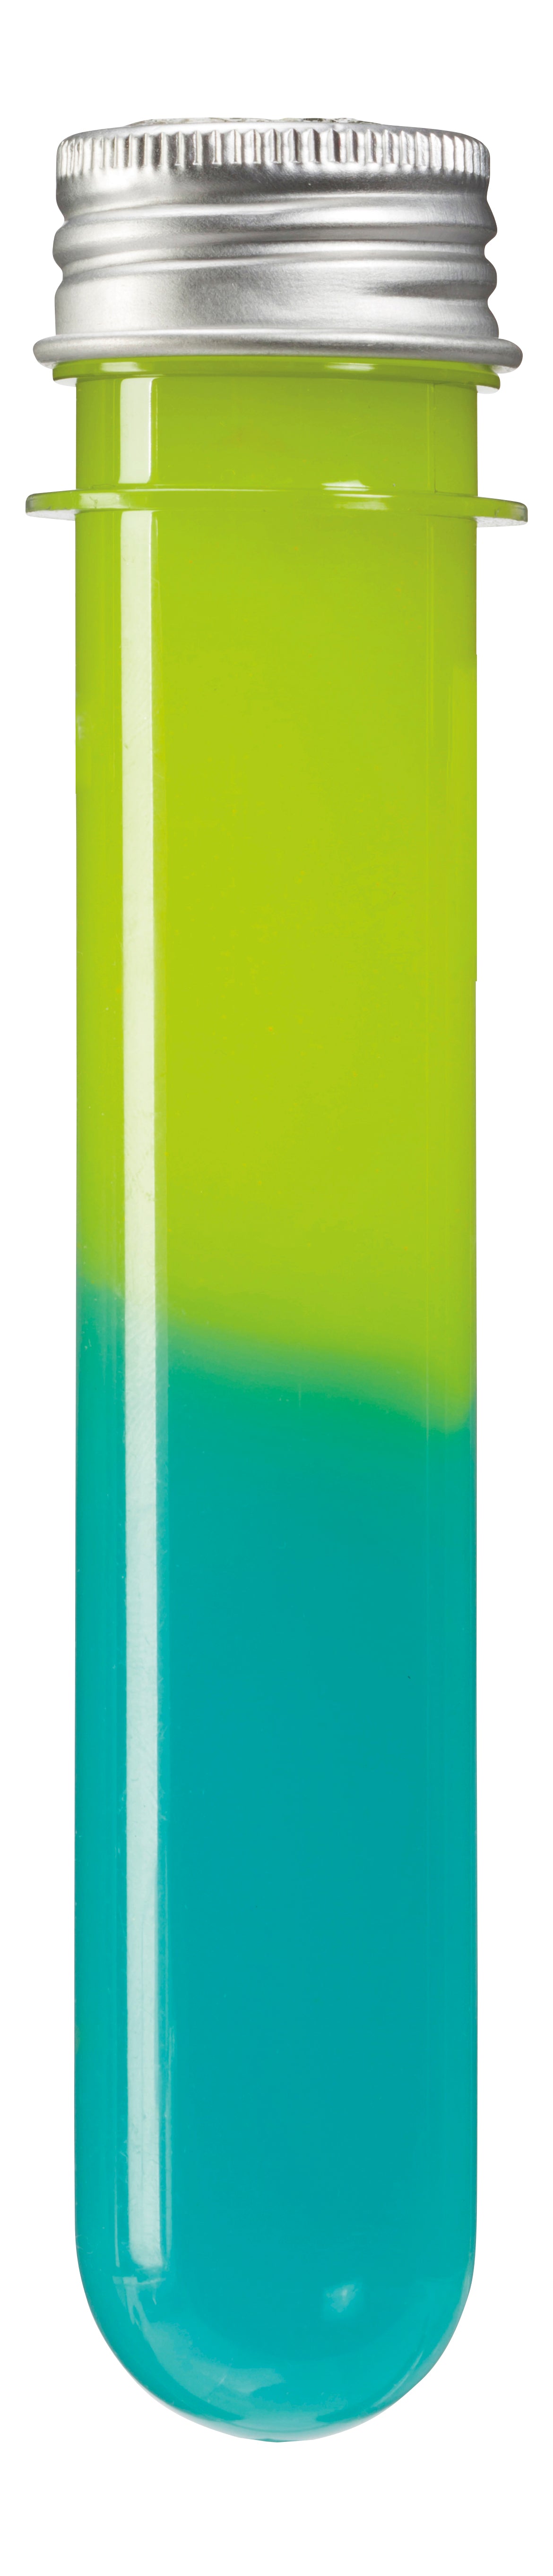 Toysmith Two-Color Test Tube Slime